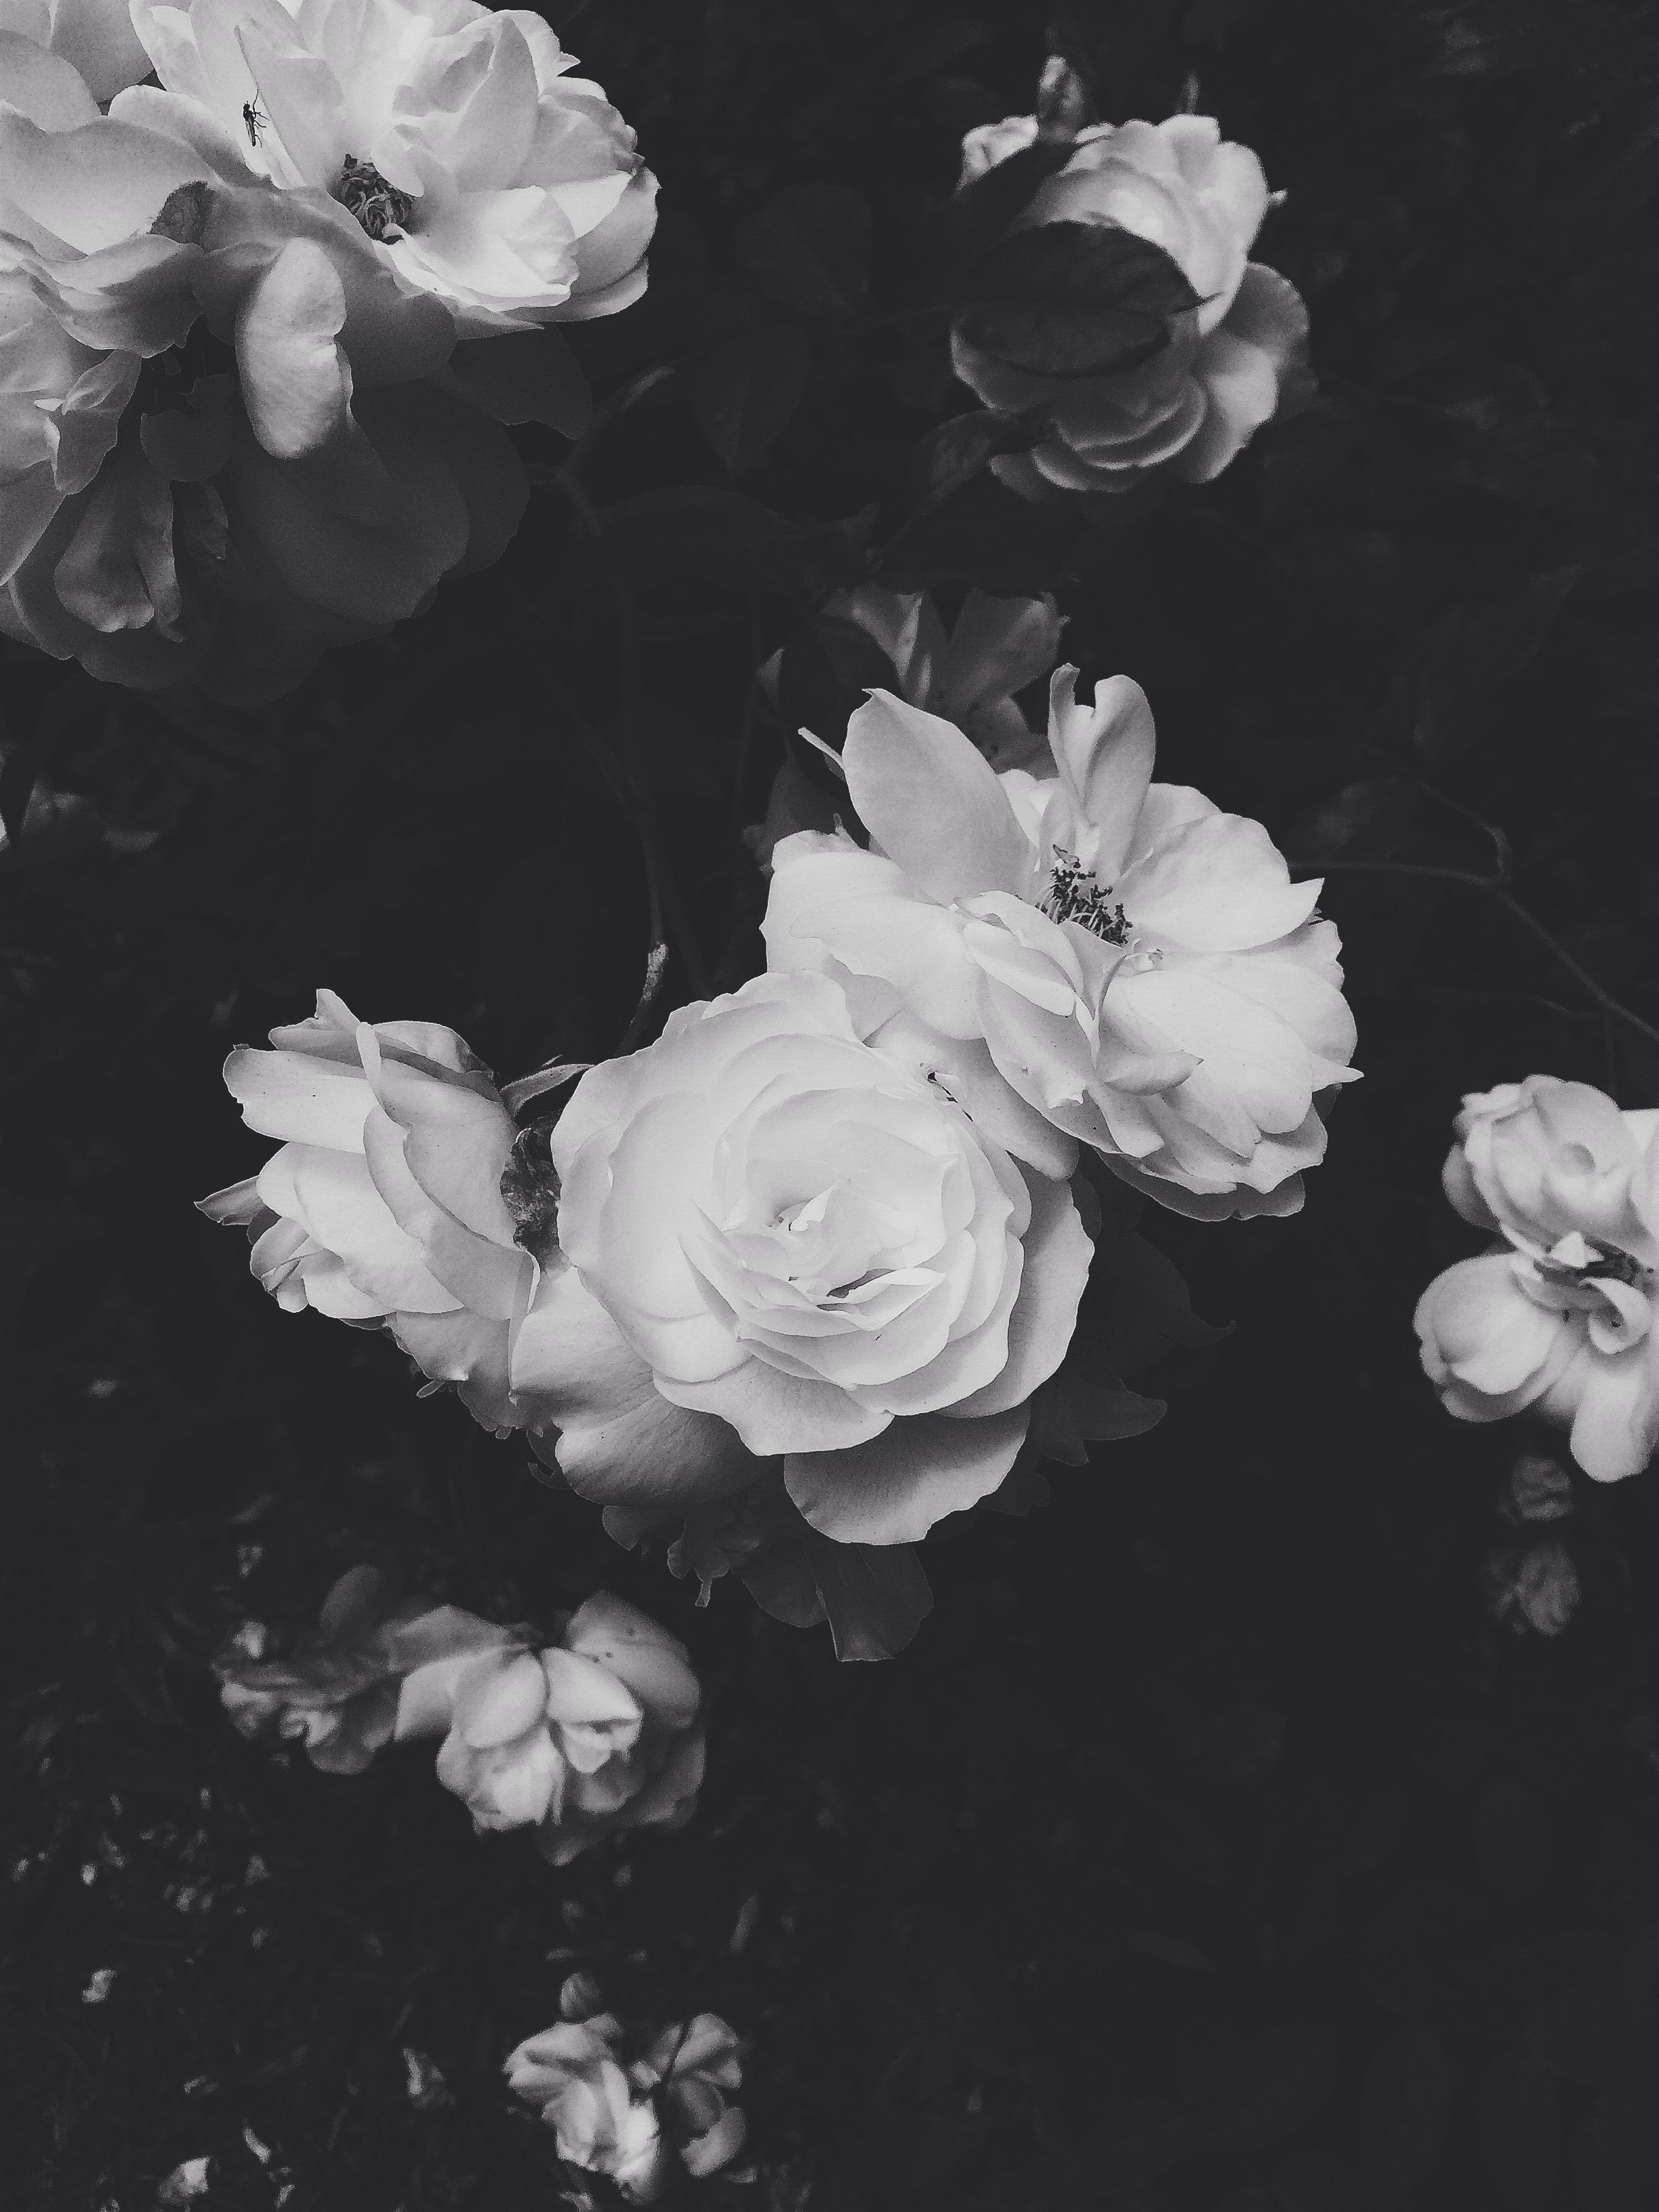  Black  And White  Aesthetic  Roses Wallpapers  Wallpaper  Cave